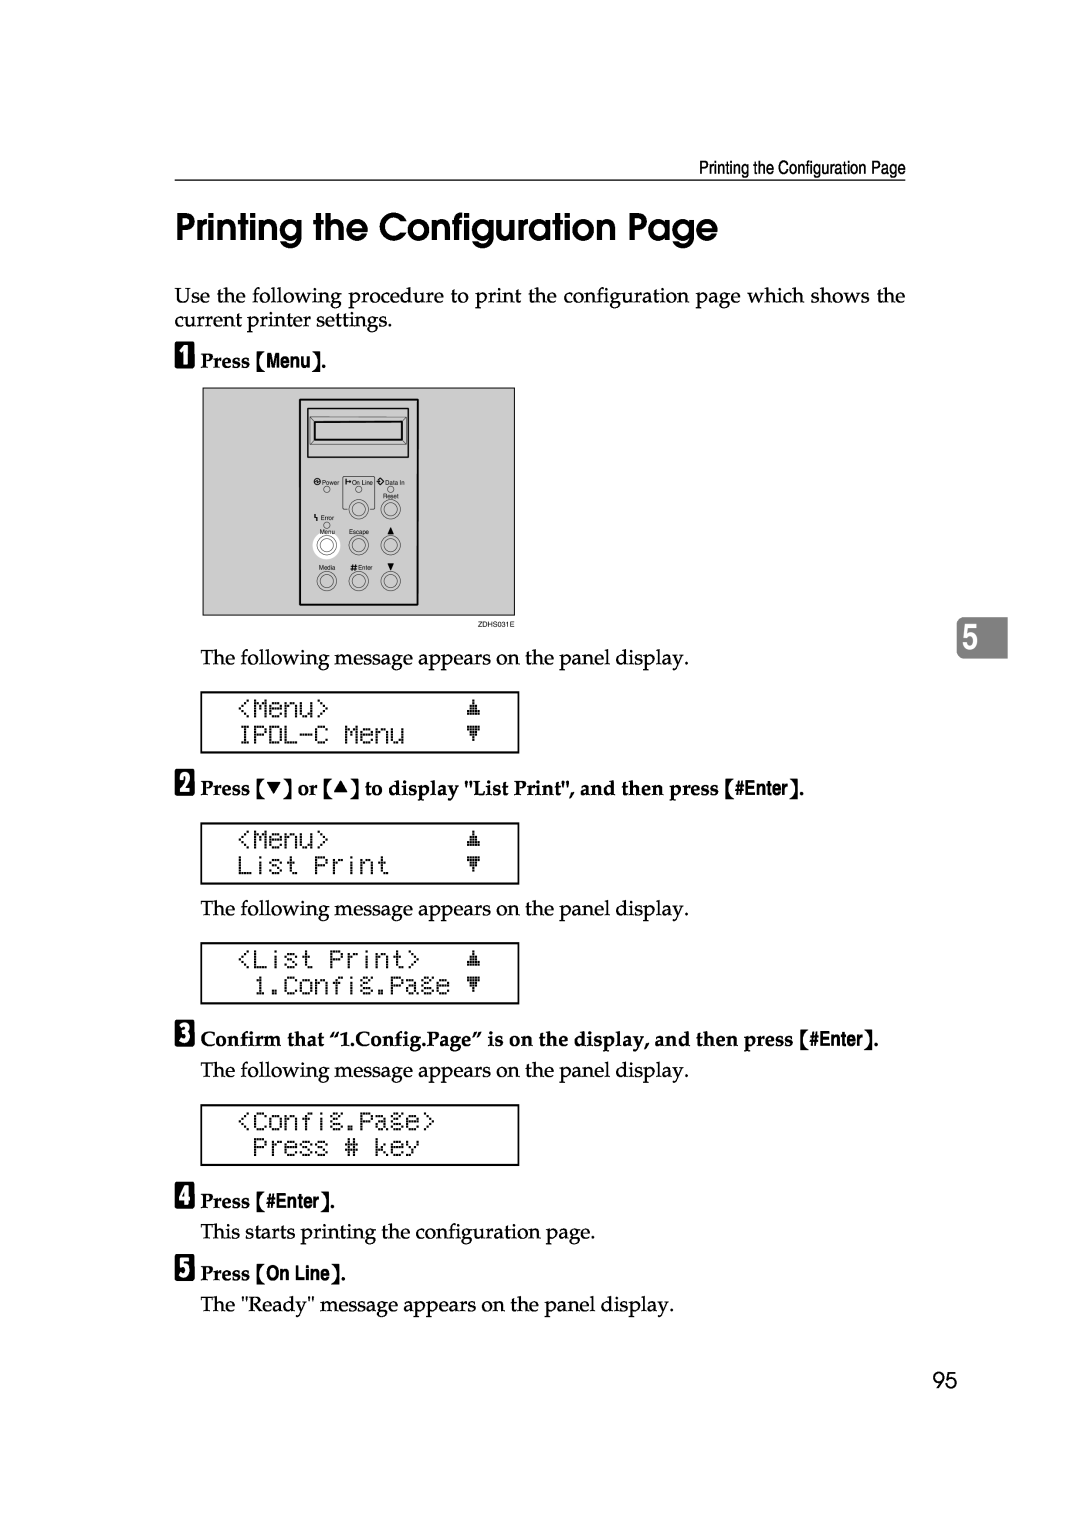 Lanier AP206 Printing the Configuration Page, IPDL-C Menu, List Print j 1.Config.Page l, Config.Page Press # key 